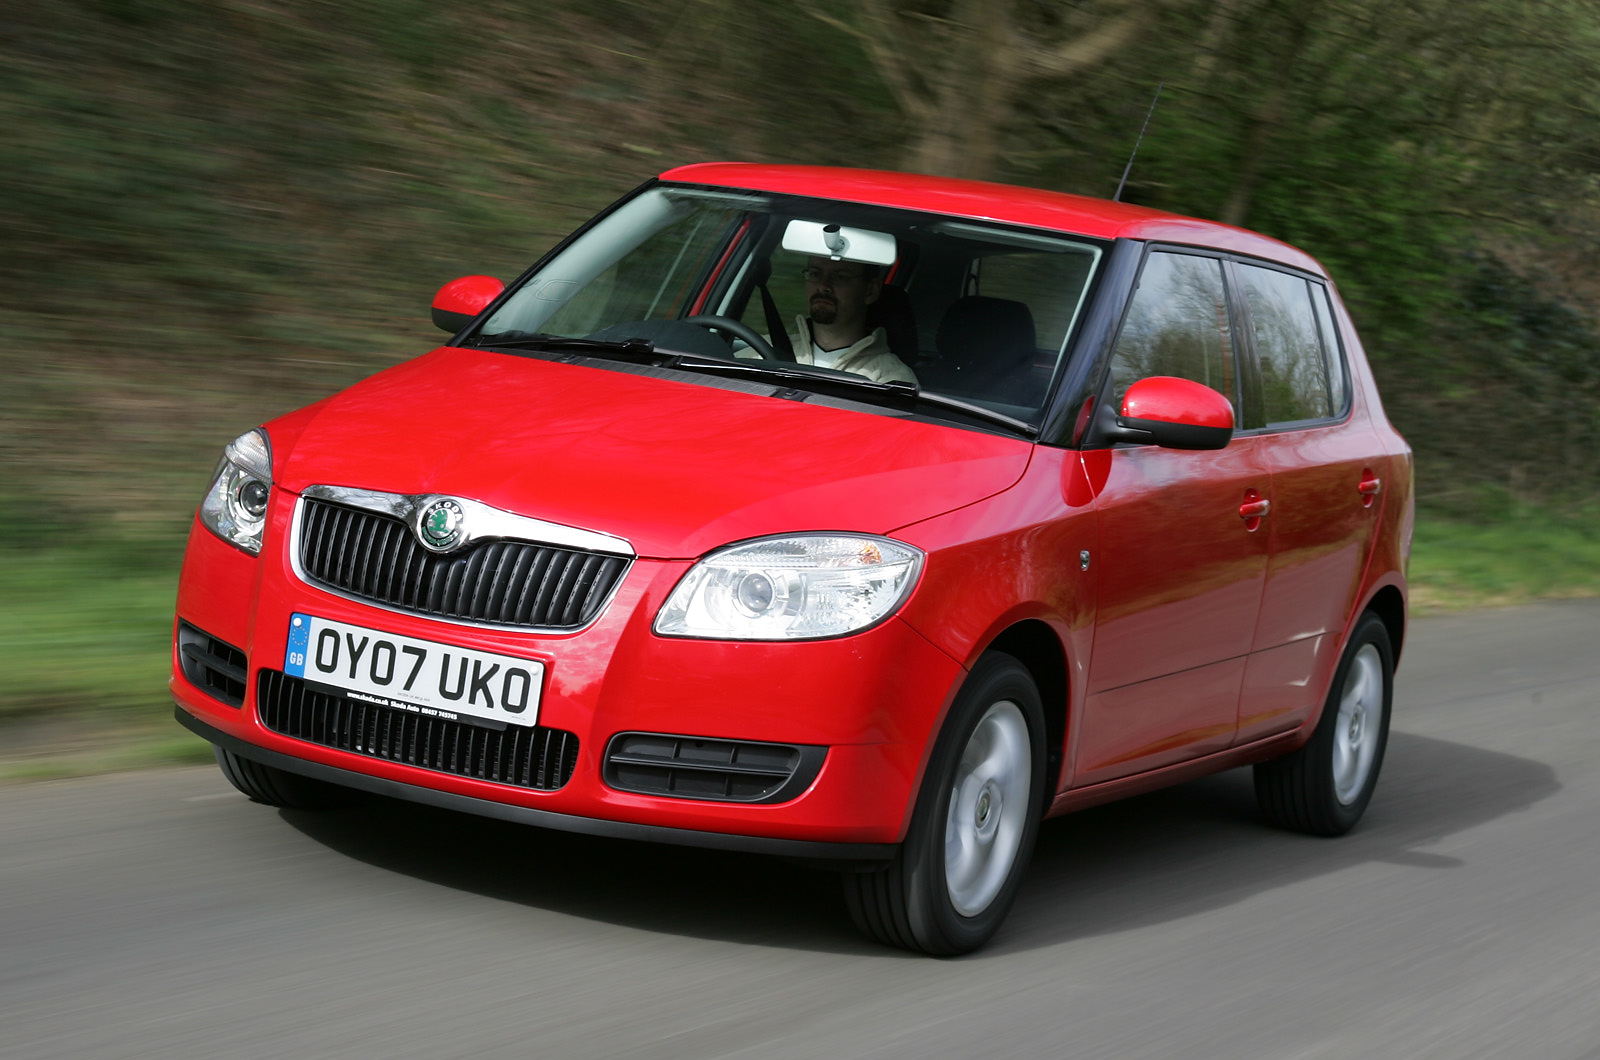 New Skoda Roomster: prices, specs, release date